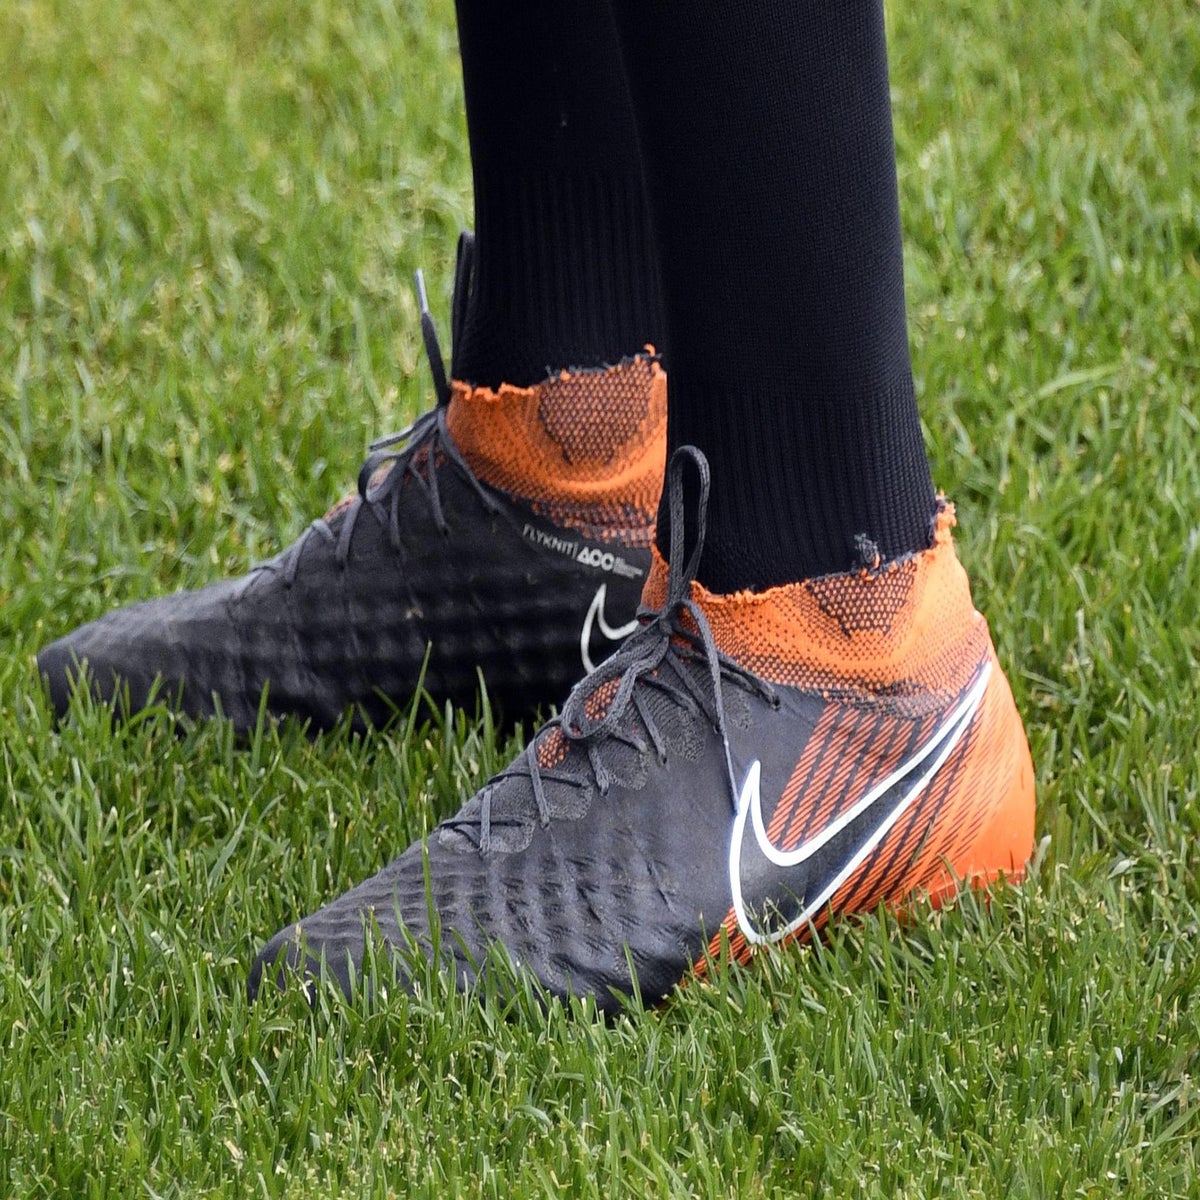 Excelente atómico Autenticación World Cup 2018: Nike withdraws supply of football boots to Iran national  team due to new US sanctions | The Independent | The Independent